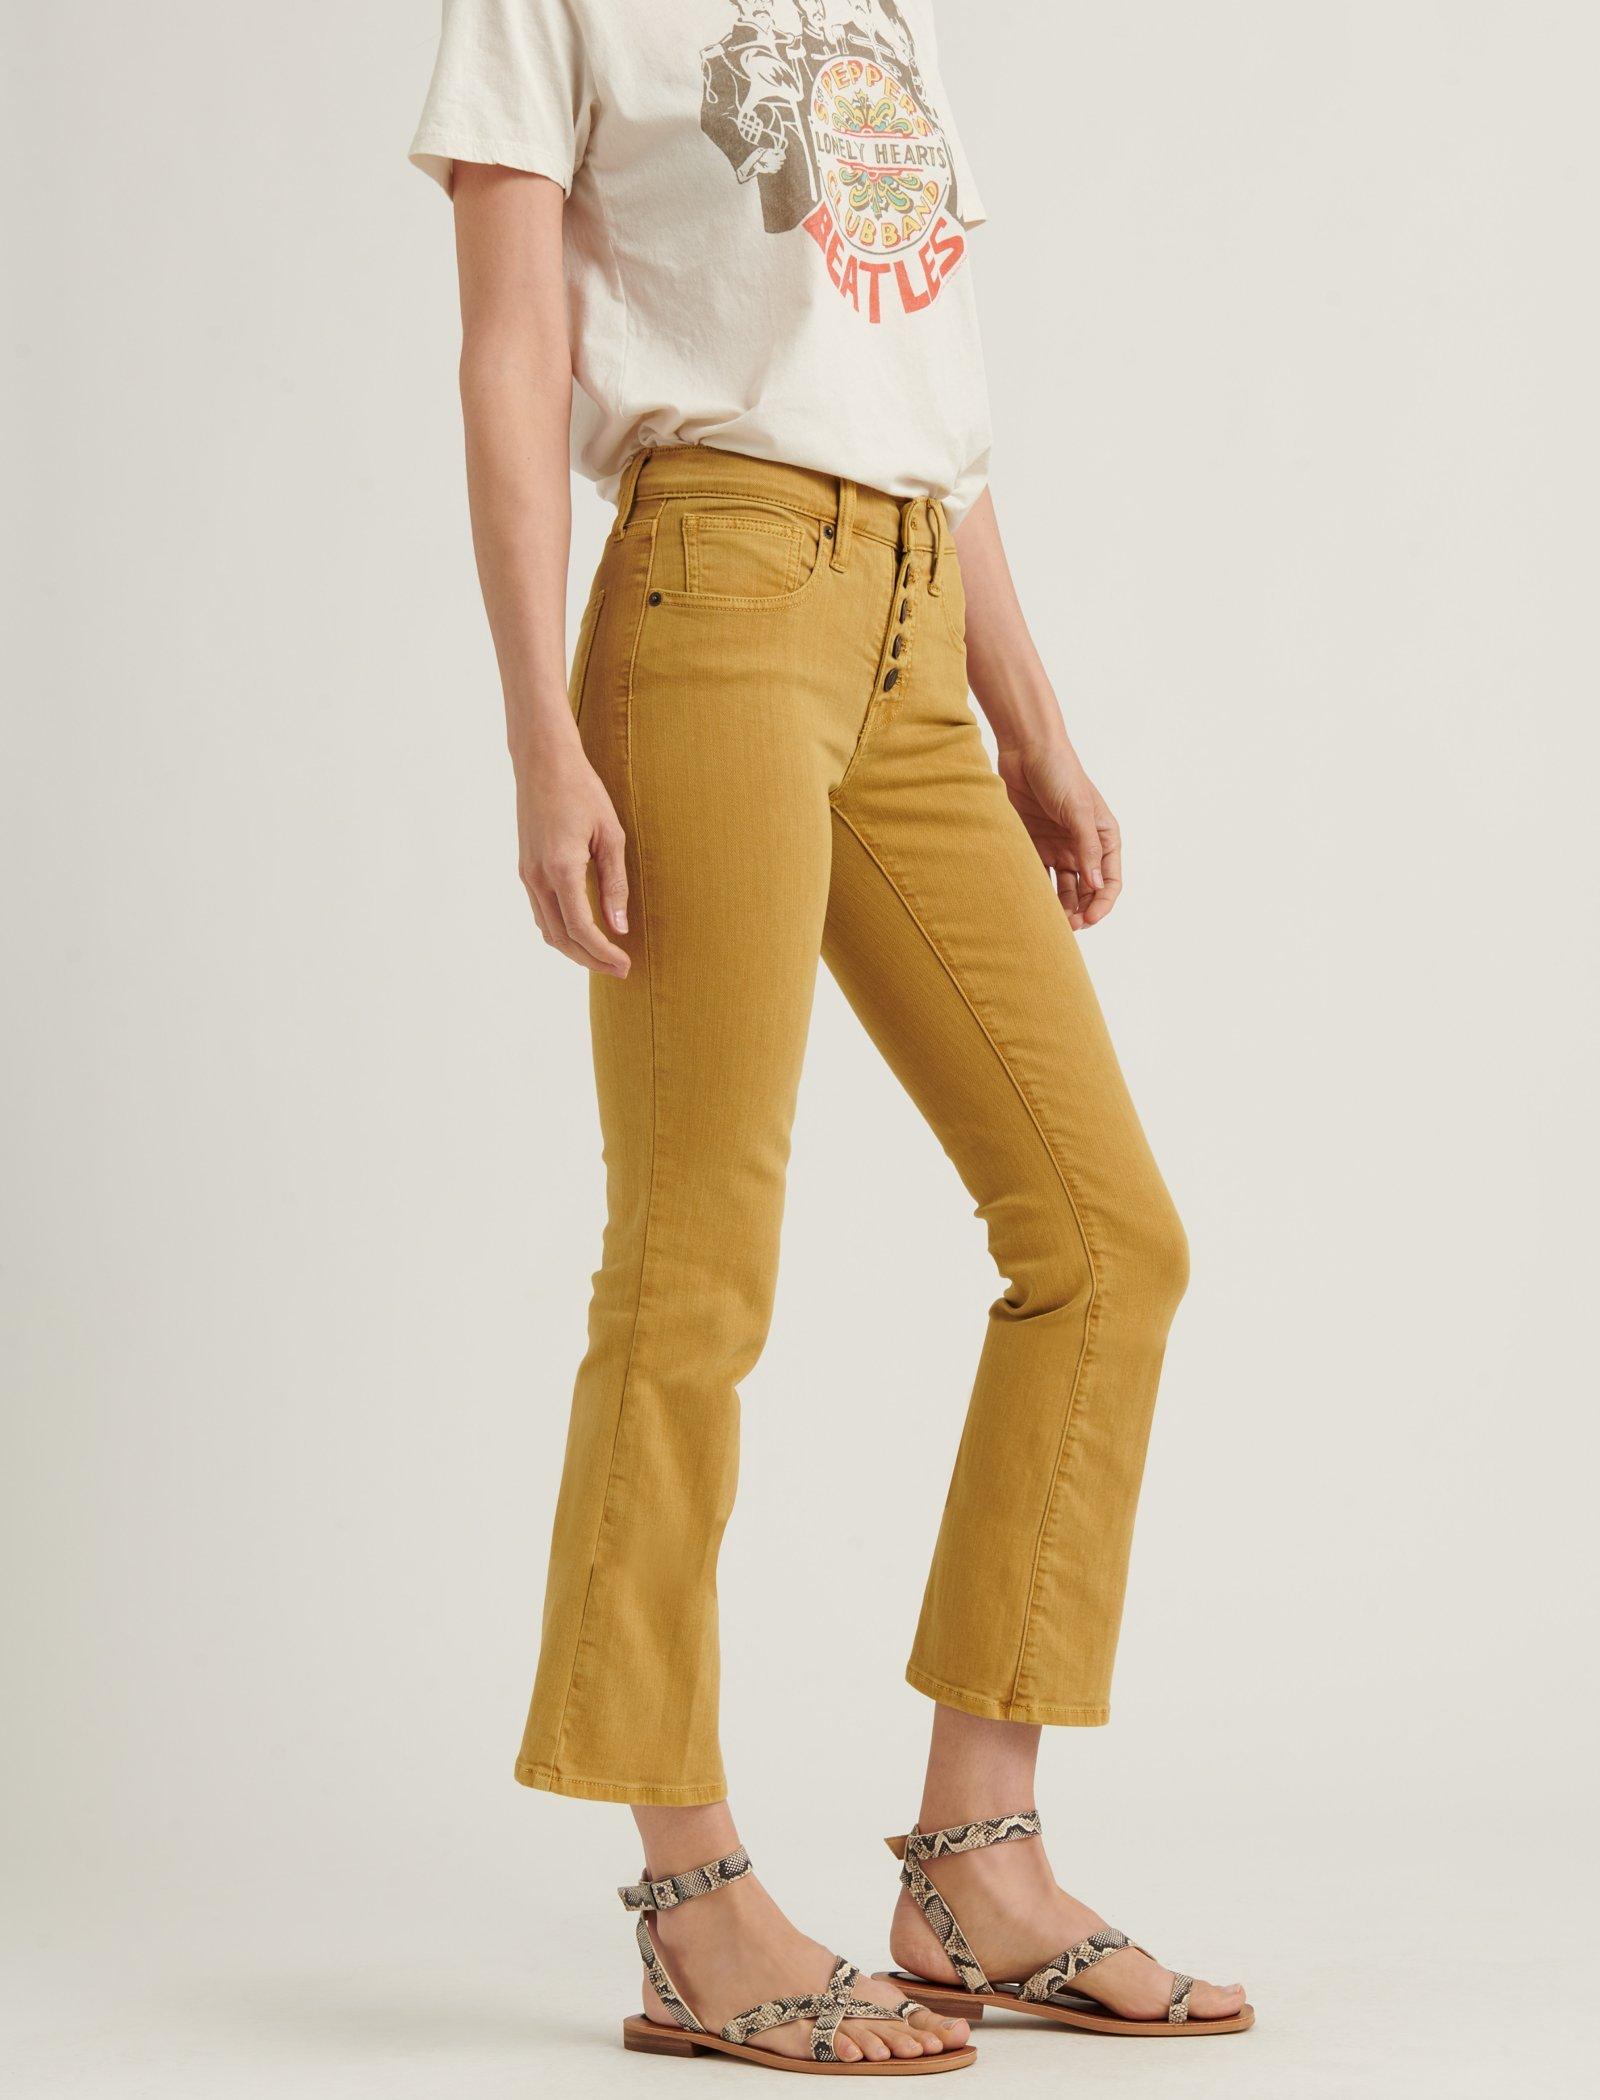 lucky brand colored jeans